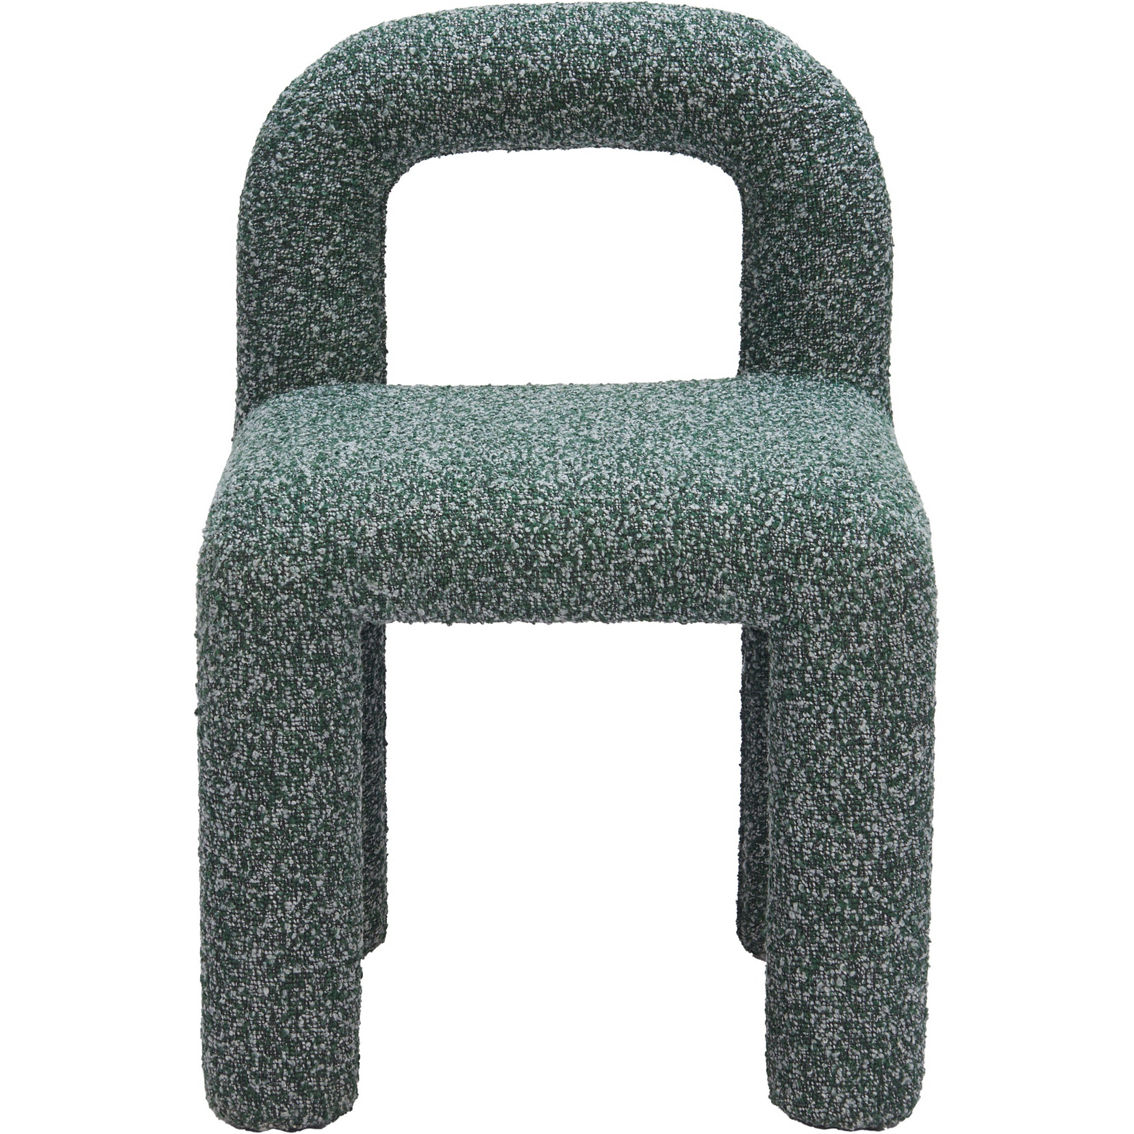 Zuo Modern Arum Dining Chairs Snowy Green 2 pk. - Image 4 of 8